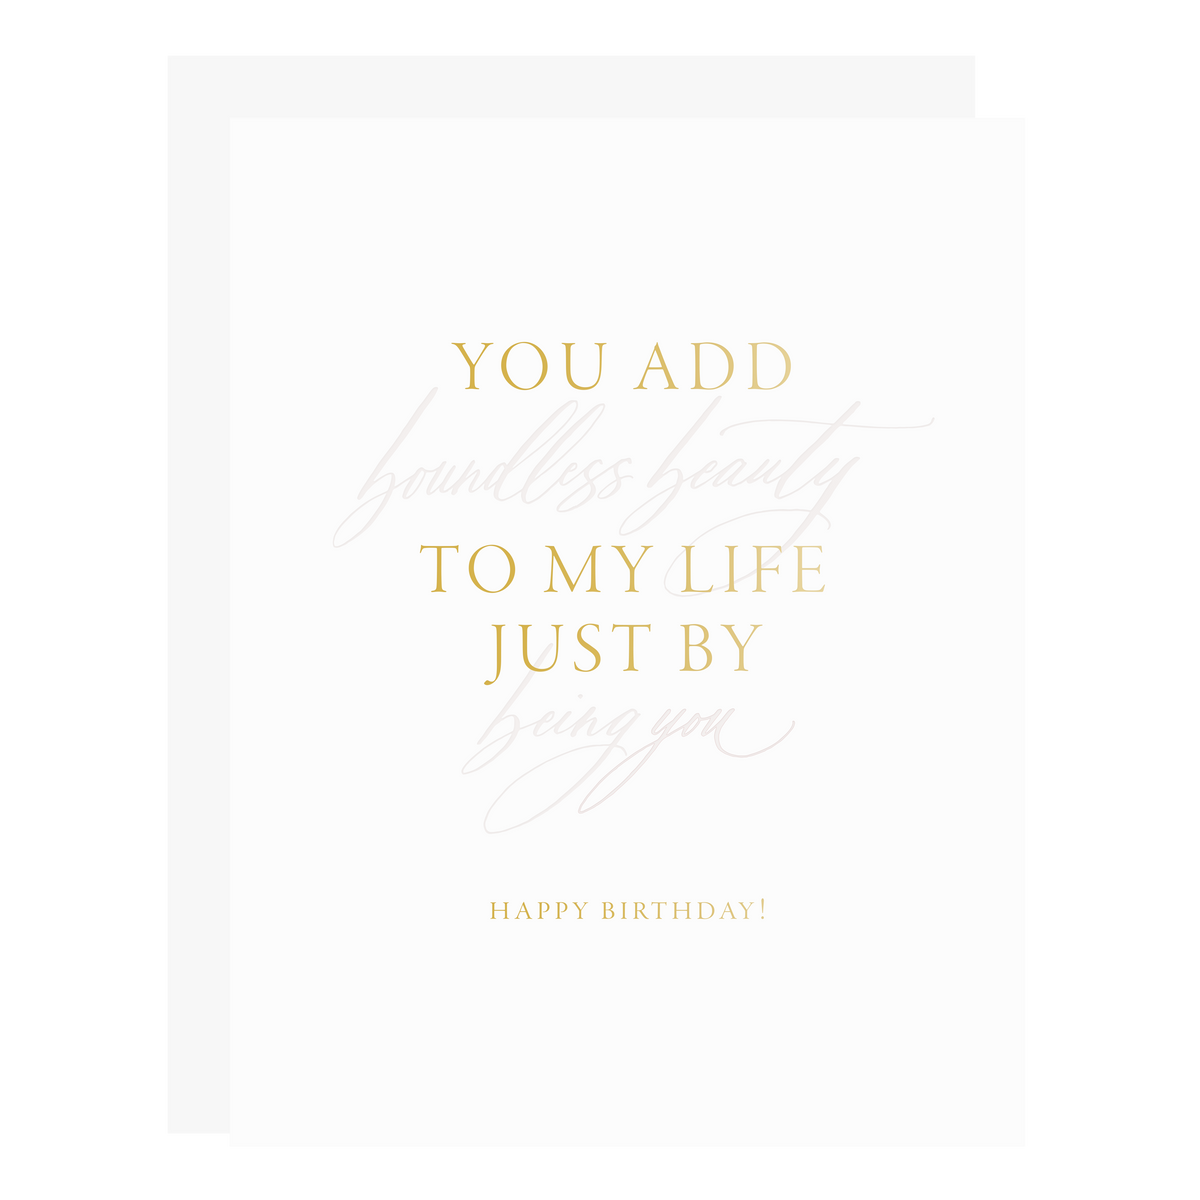 Our &quot;Boundless Beauty&quot; card, letterpress printed by hand in pale blush ink and gold foil.